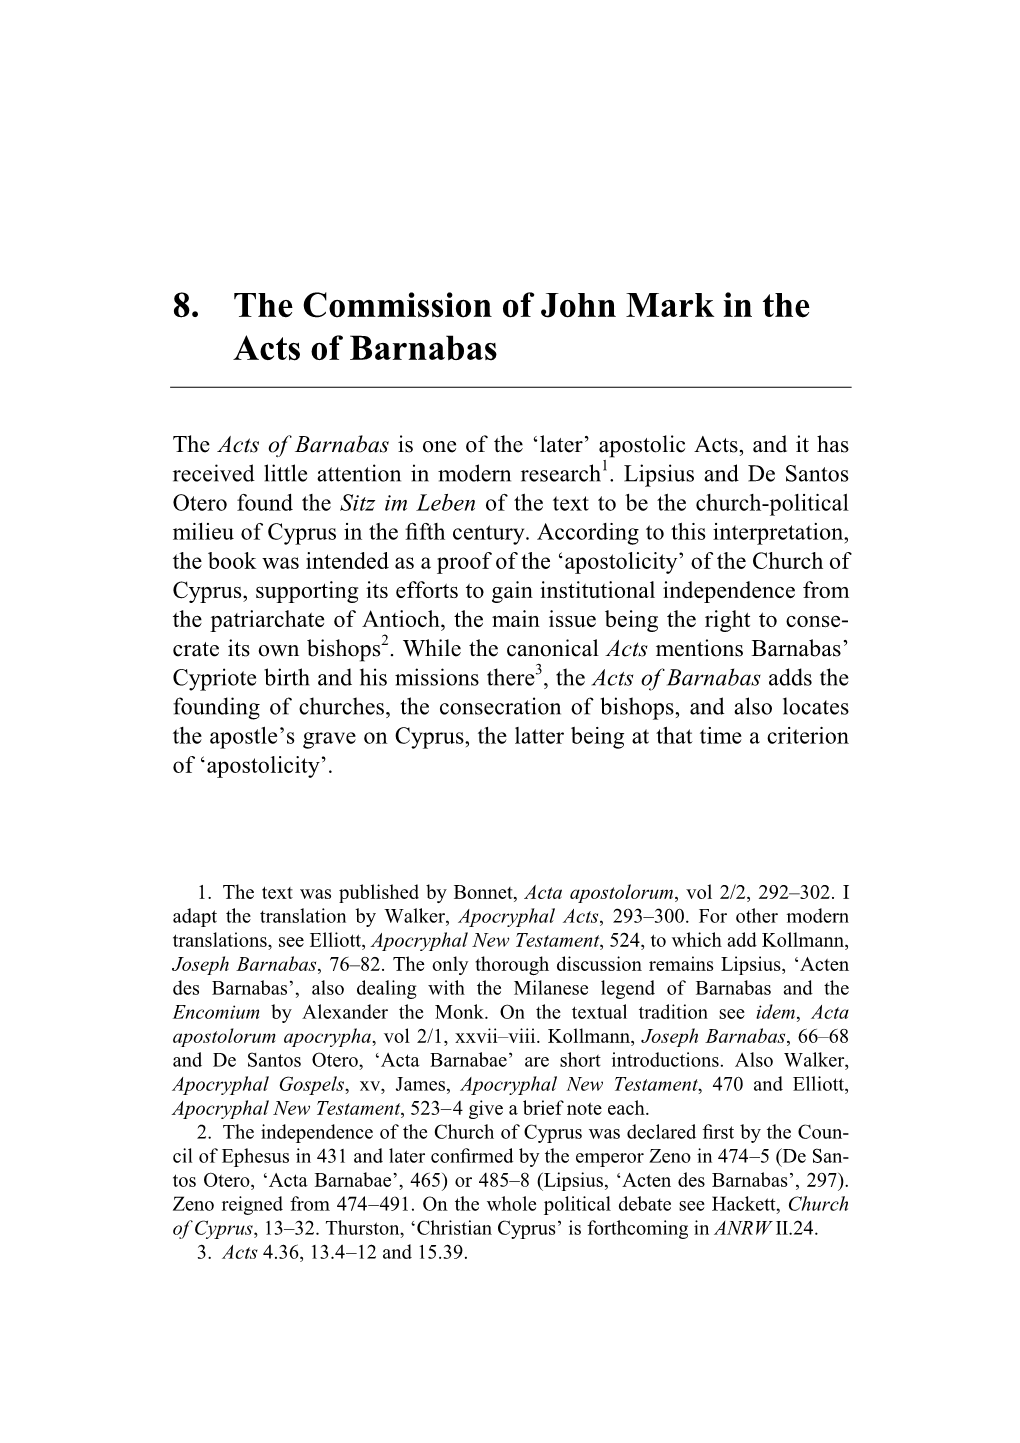 8. the Commission of John Mark in the Acts of Barnabas